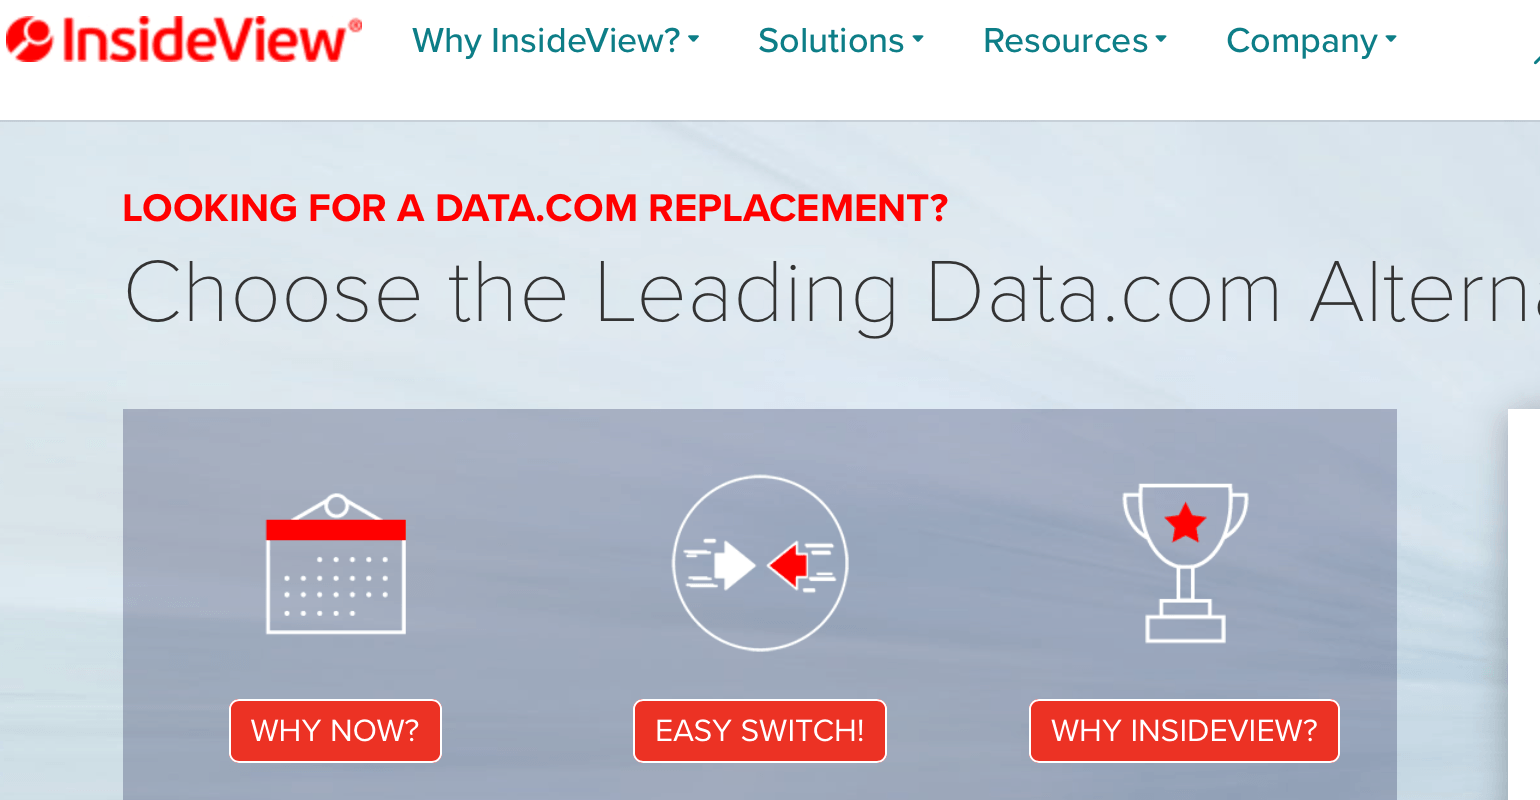 Data.com Logo - InsideView reaches out to Data.com customers to avoid data